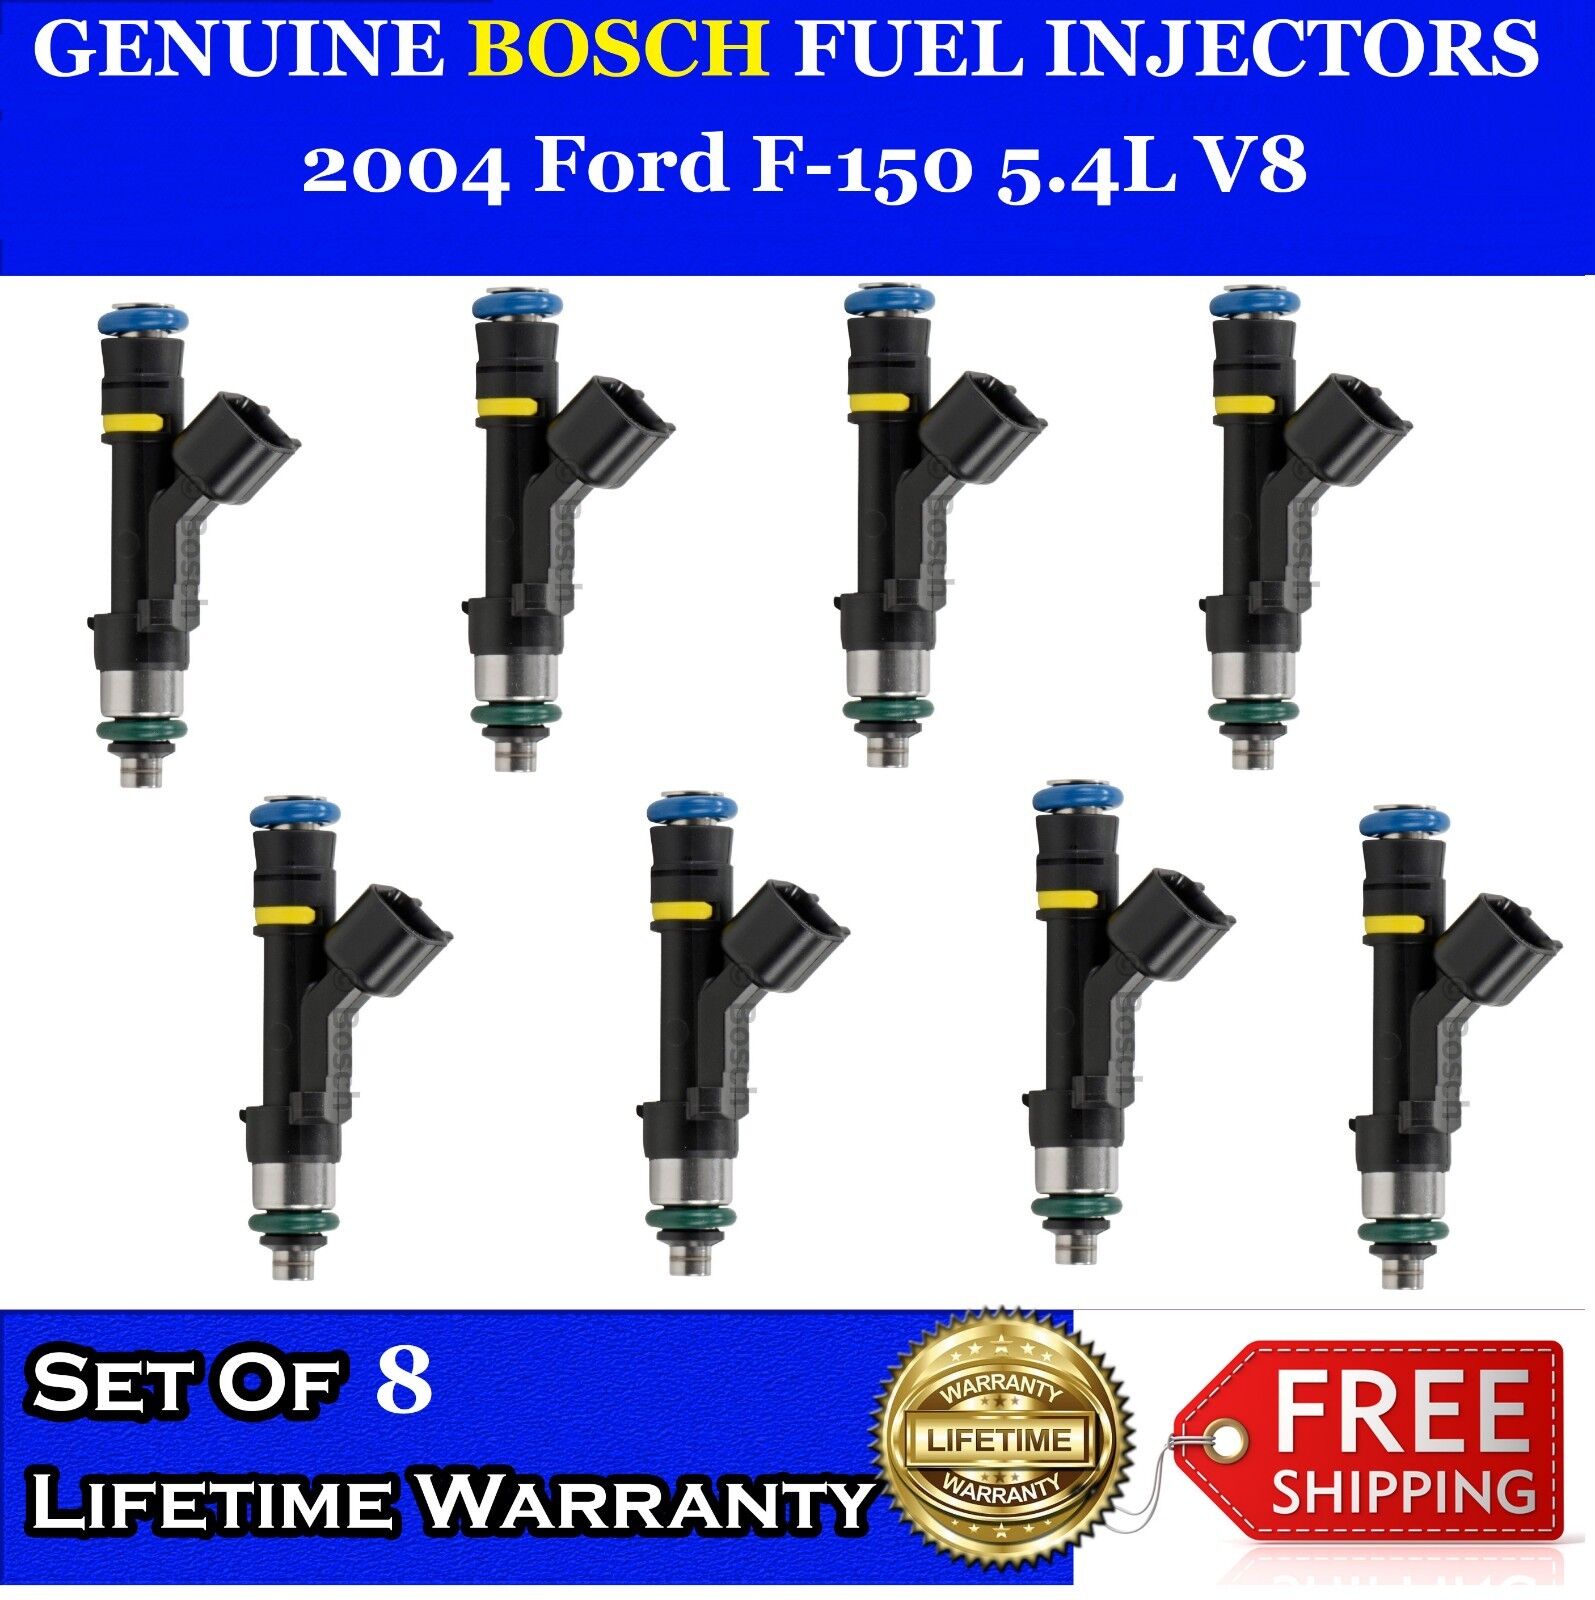 Upgraded 8x OEM  Bosch Fuel Injectors for 2004 Ford F-150 5.4L V8  #0280158003